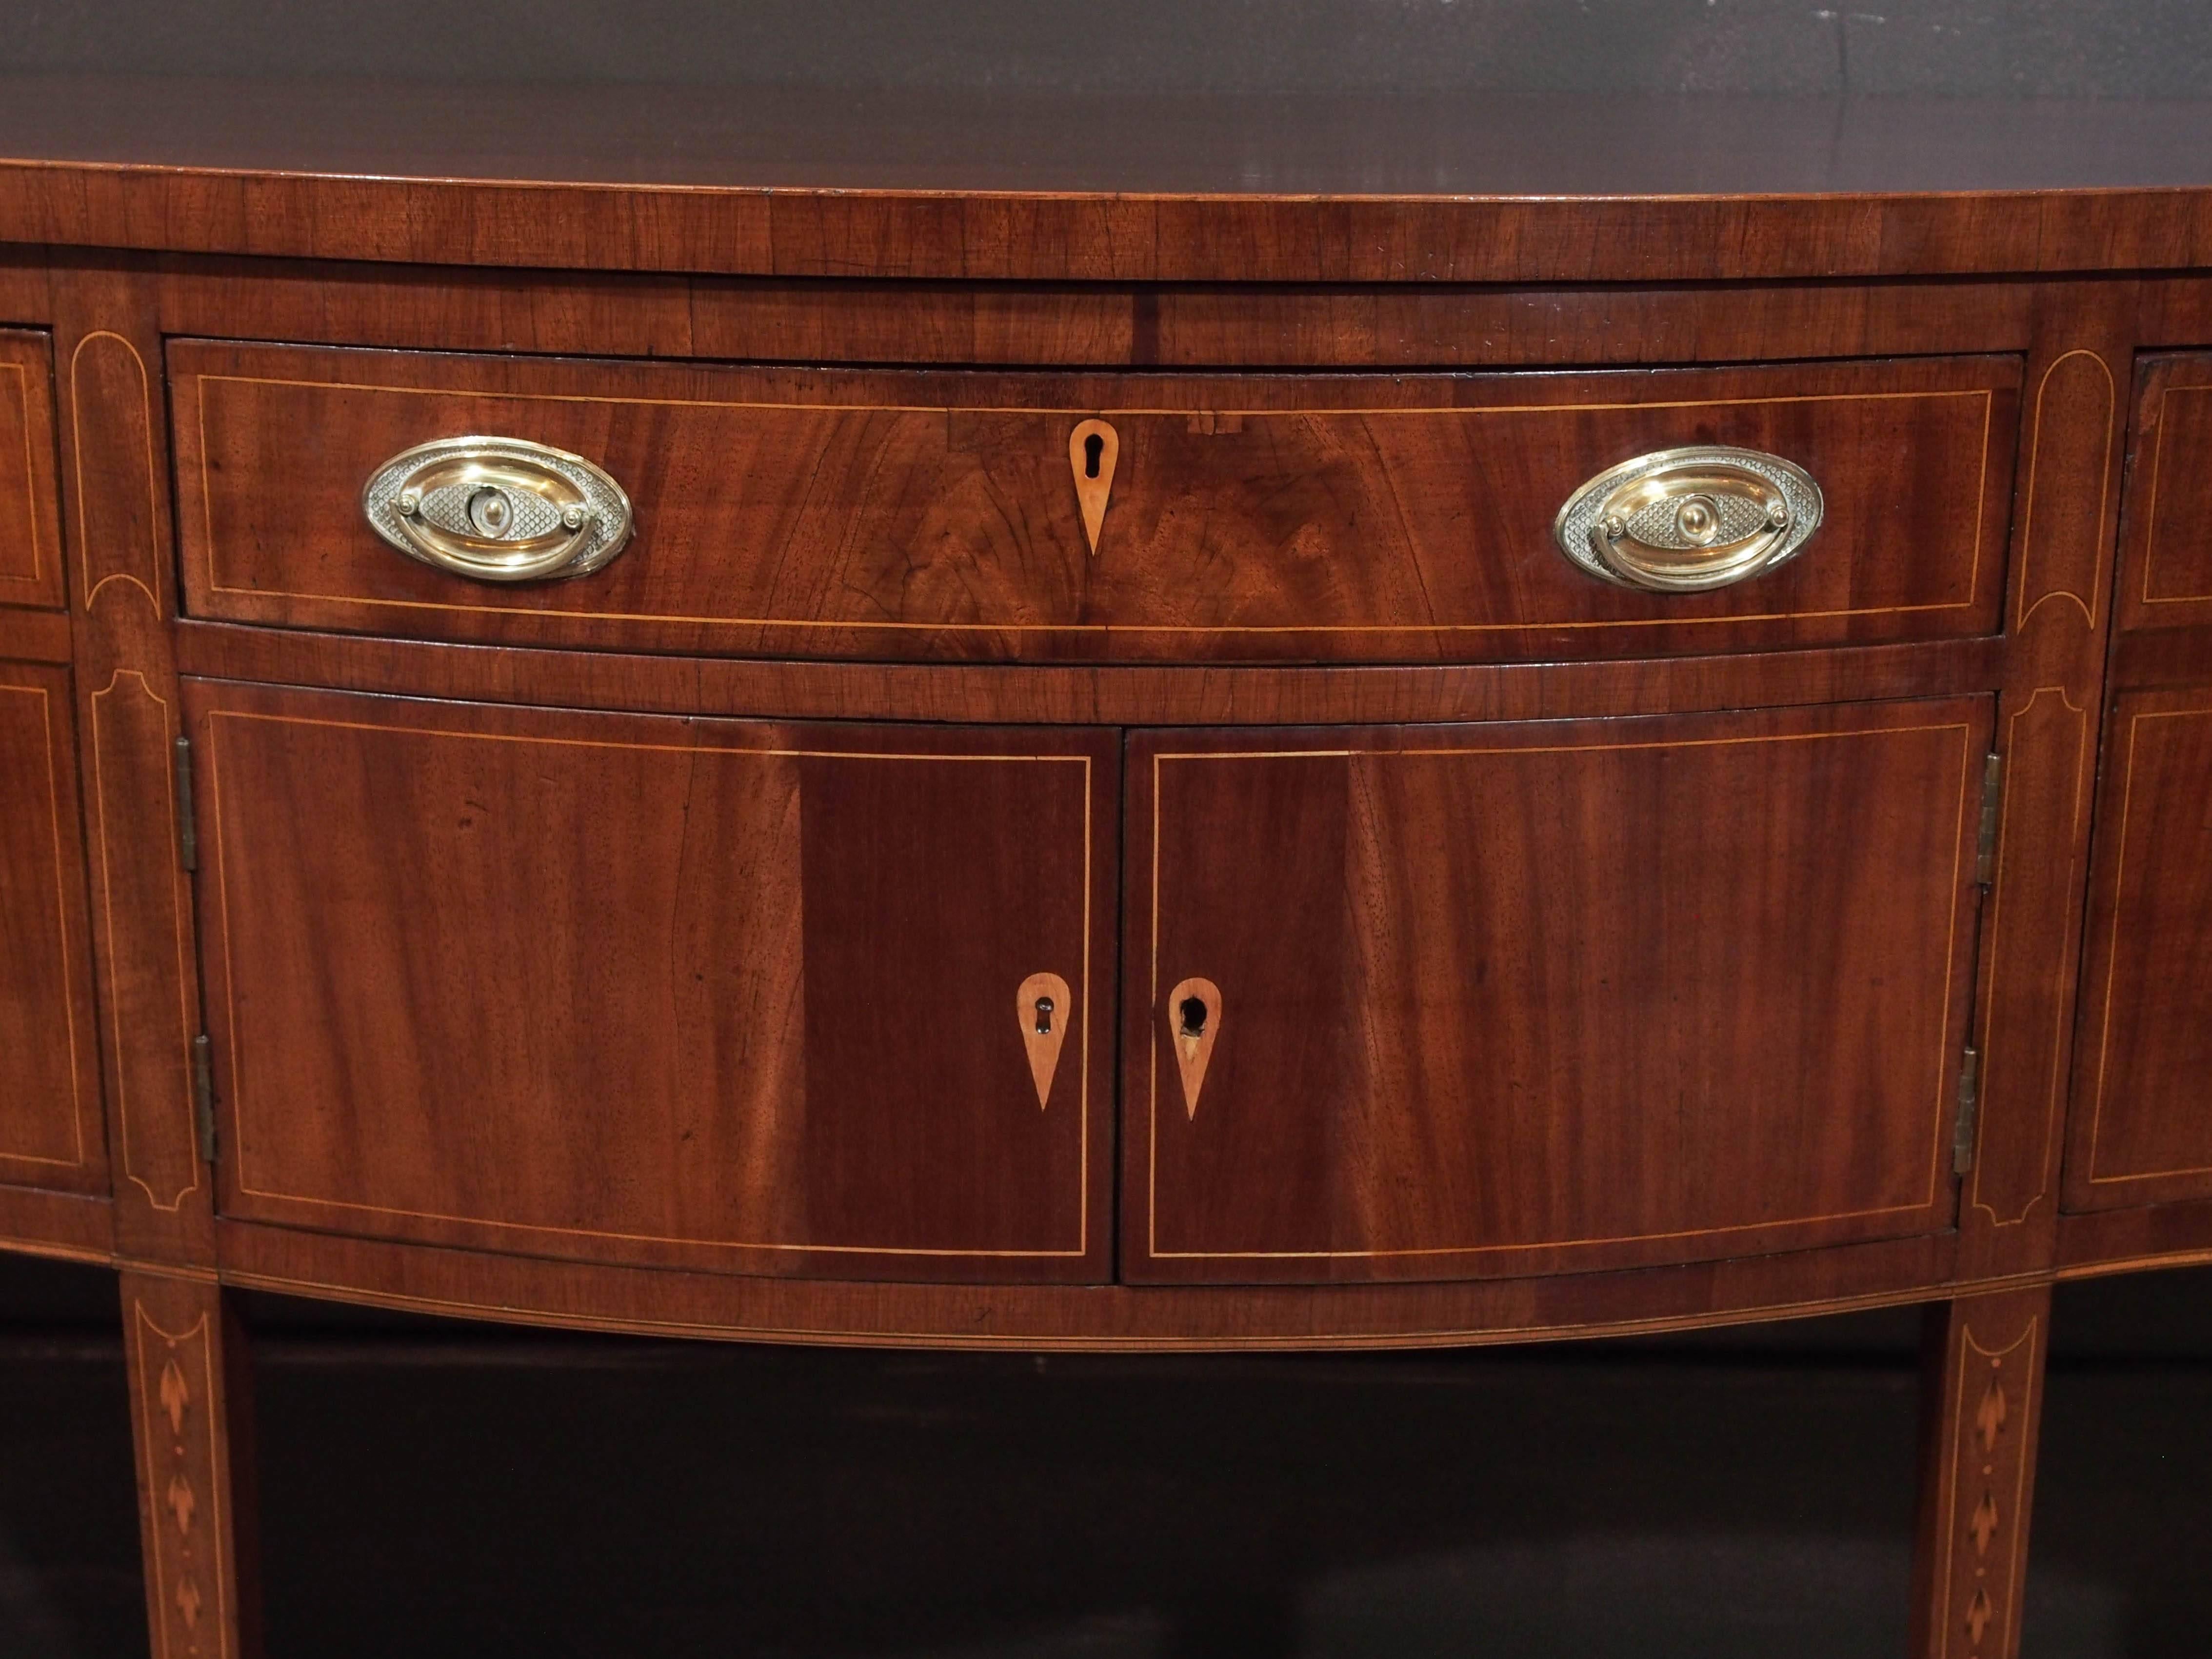 Antique American Federal Bellflower inlaid sideboard. Mahogany, circa 1800.
Baltimore. Southern pine and poplar secondary woods.